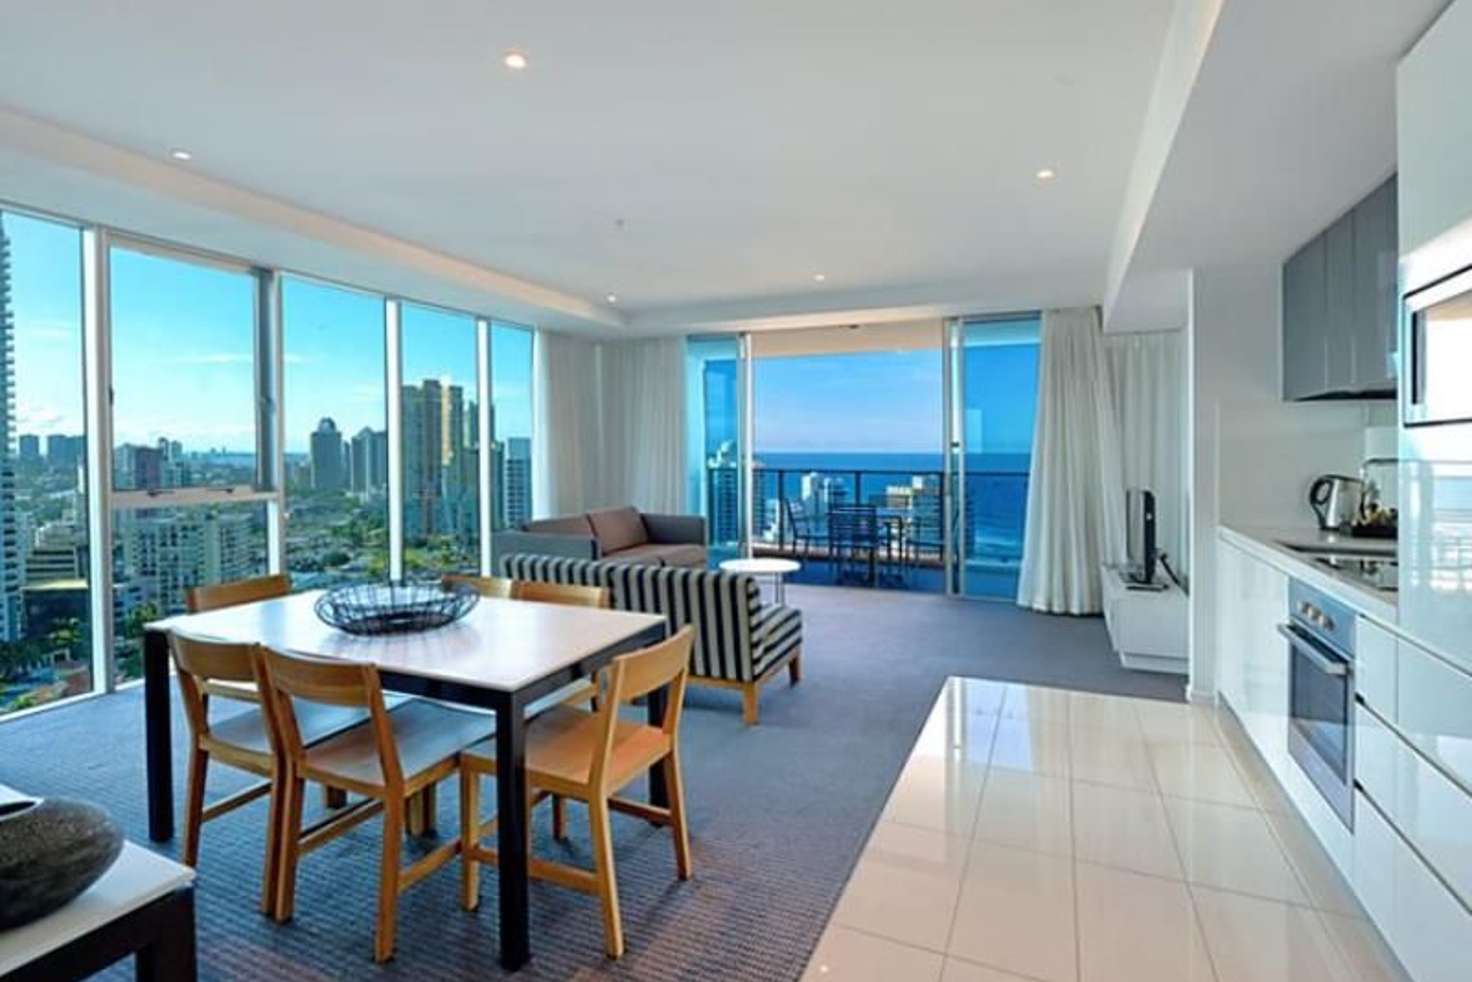 Main view of Homely apartment listing, 11601/3113 Surfers Paradise Boulevard - Hilton, Surfers Paradise QLD 4217